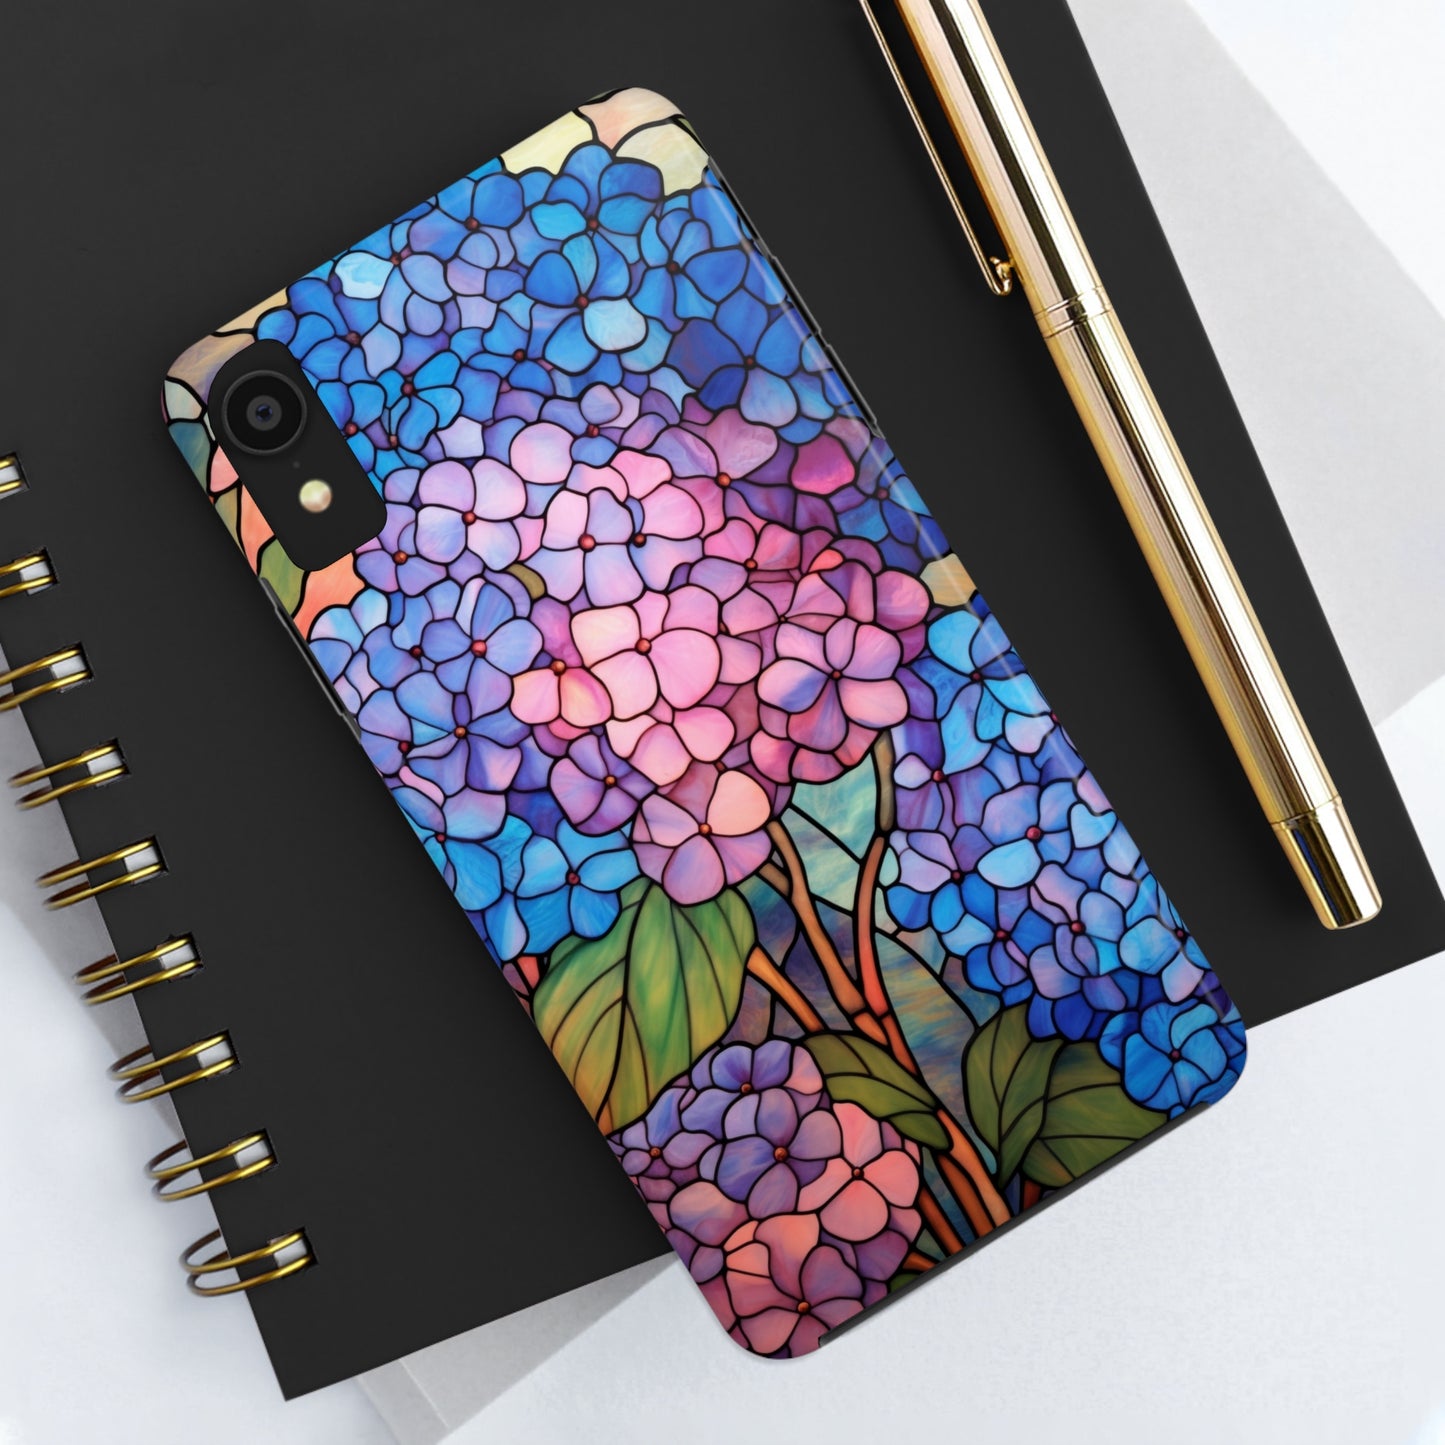 Radiant Blooms: Stained Glass Tough iPhone Case with Floral Aesthetic | Flower Power